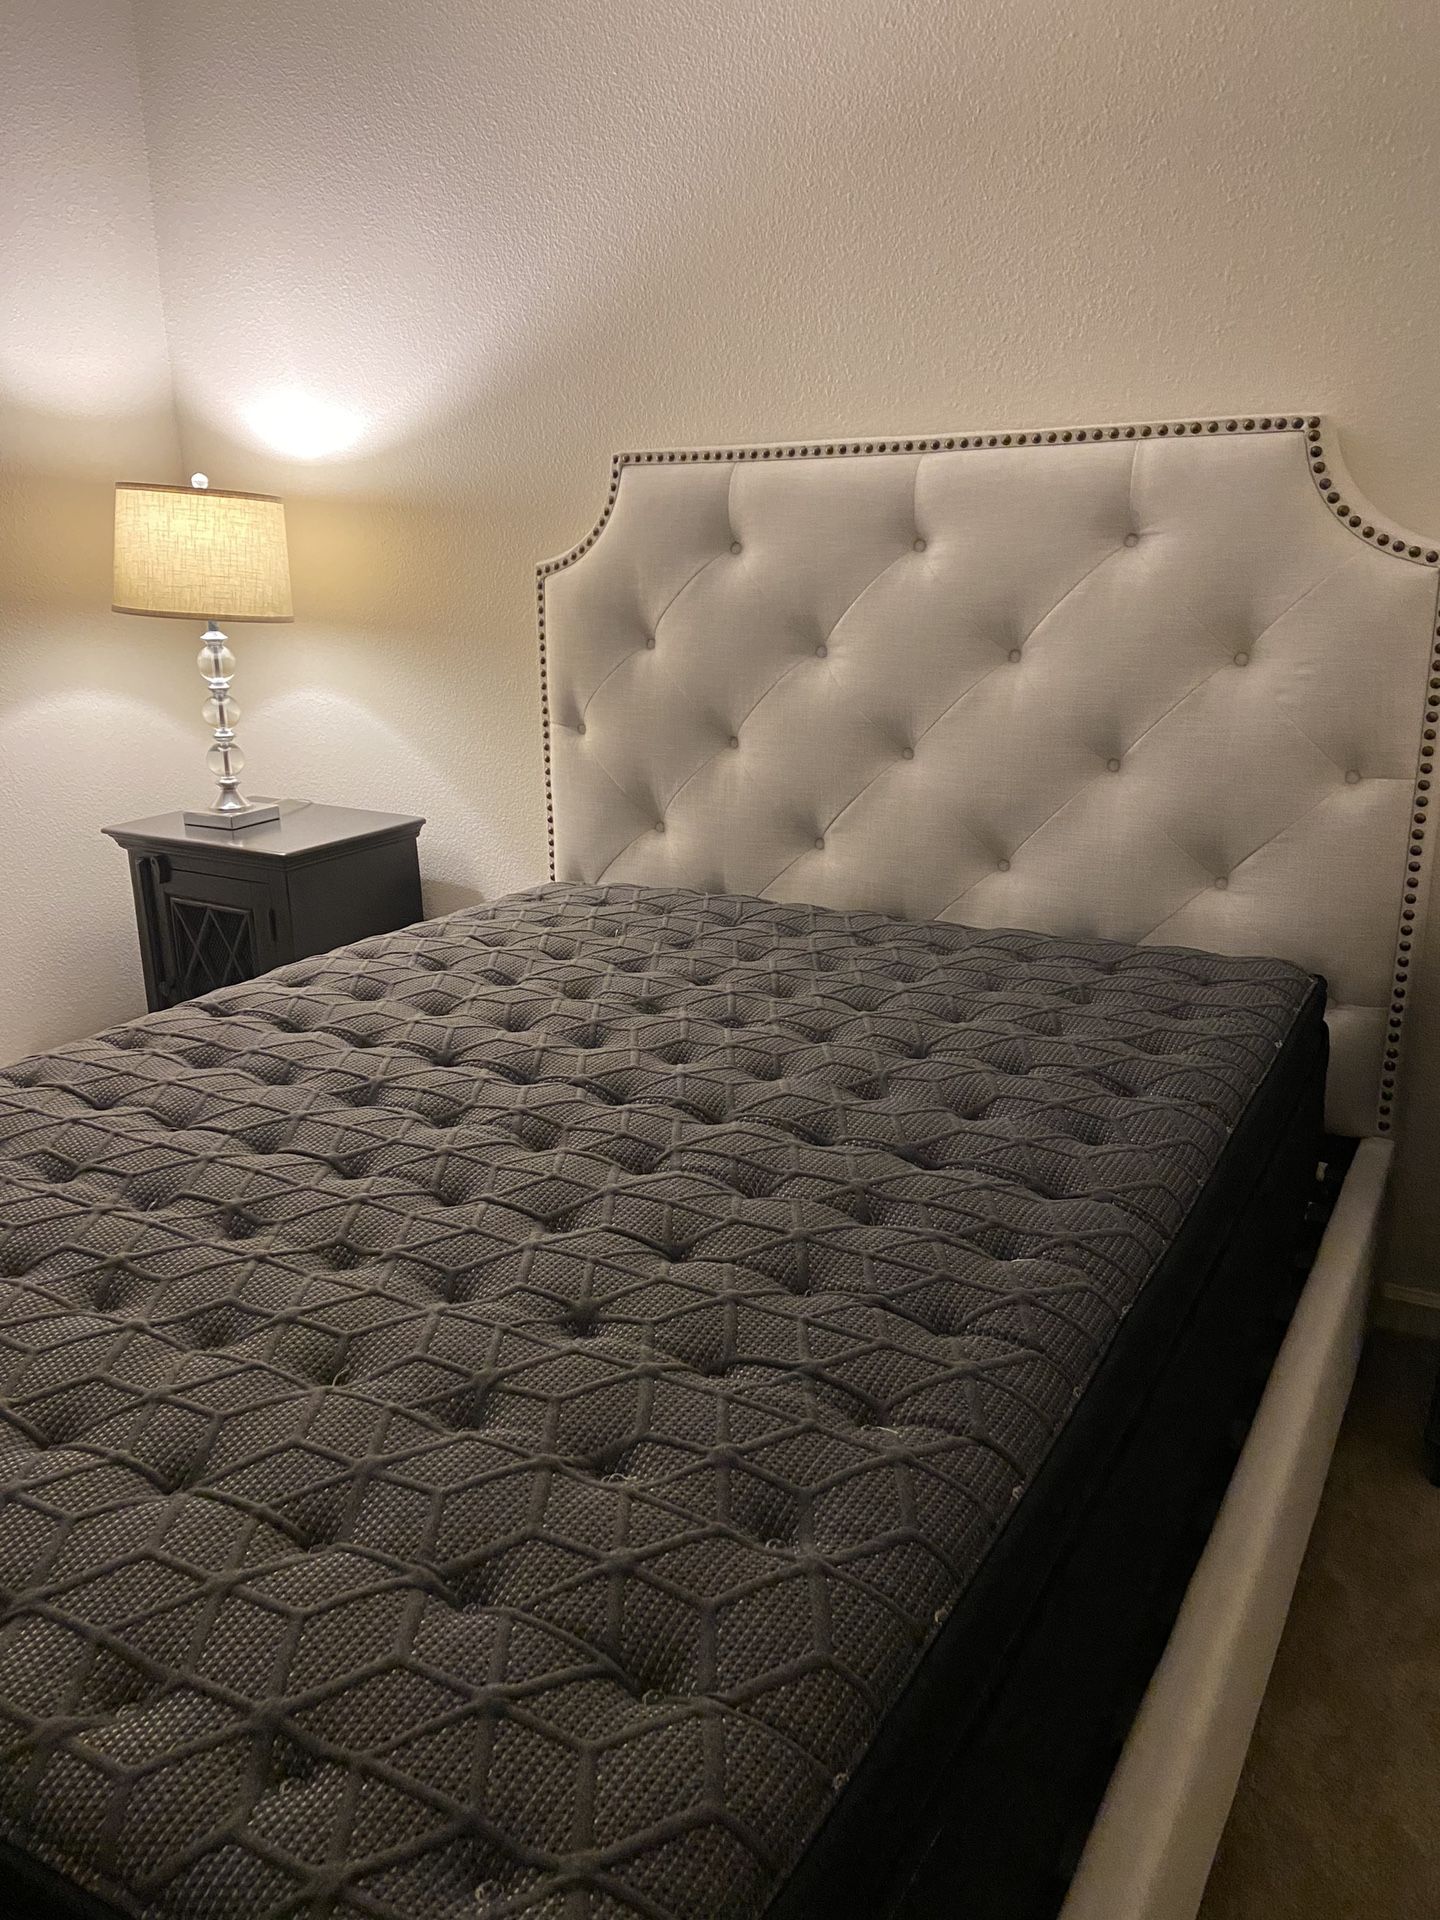 Queen Bed With Mattress -$300 Firm